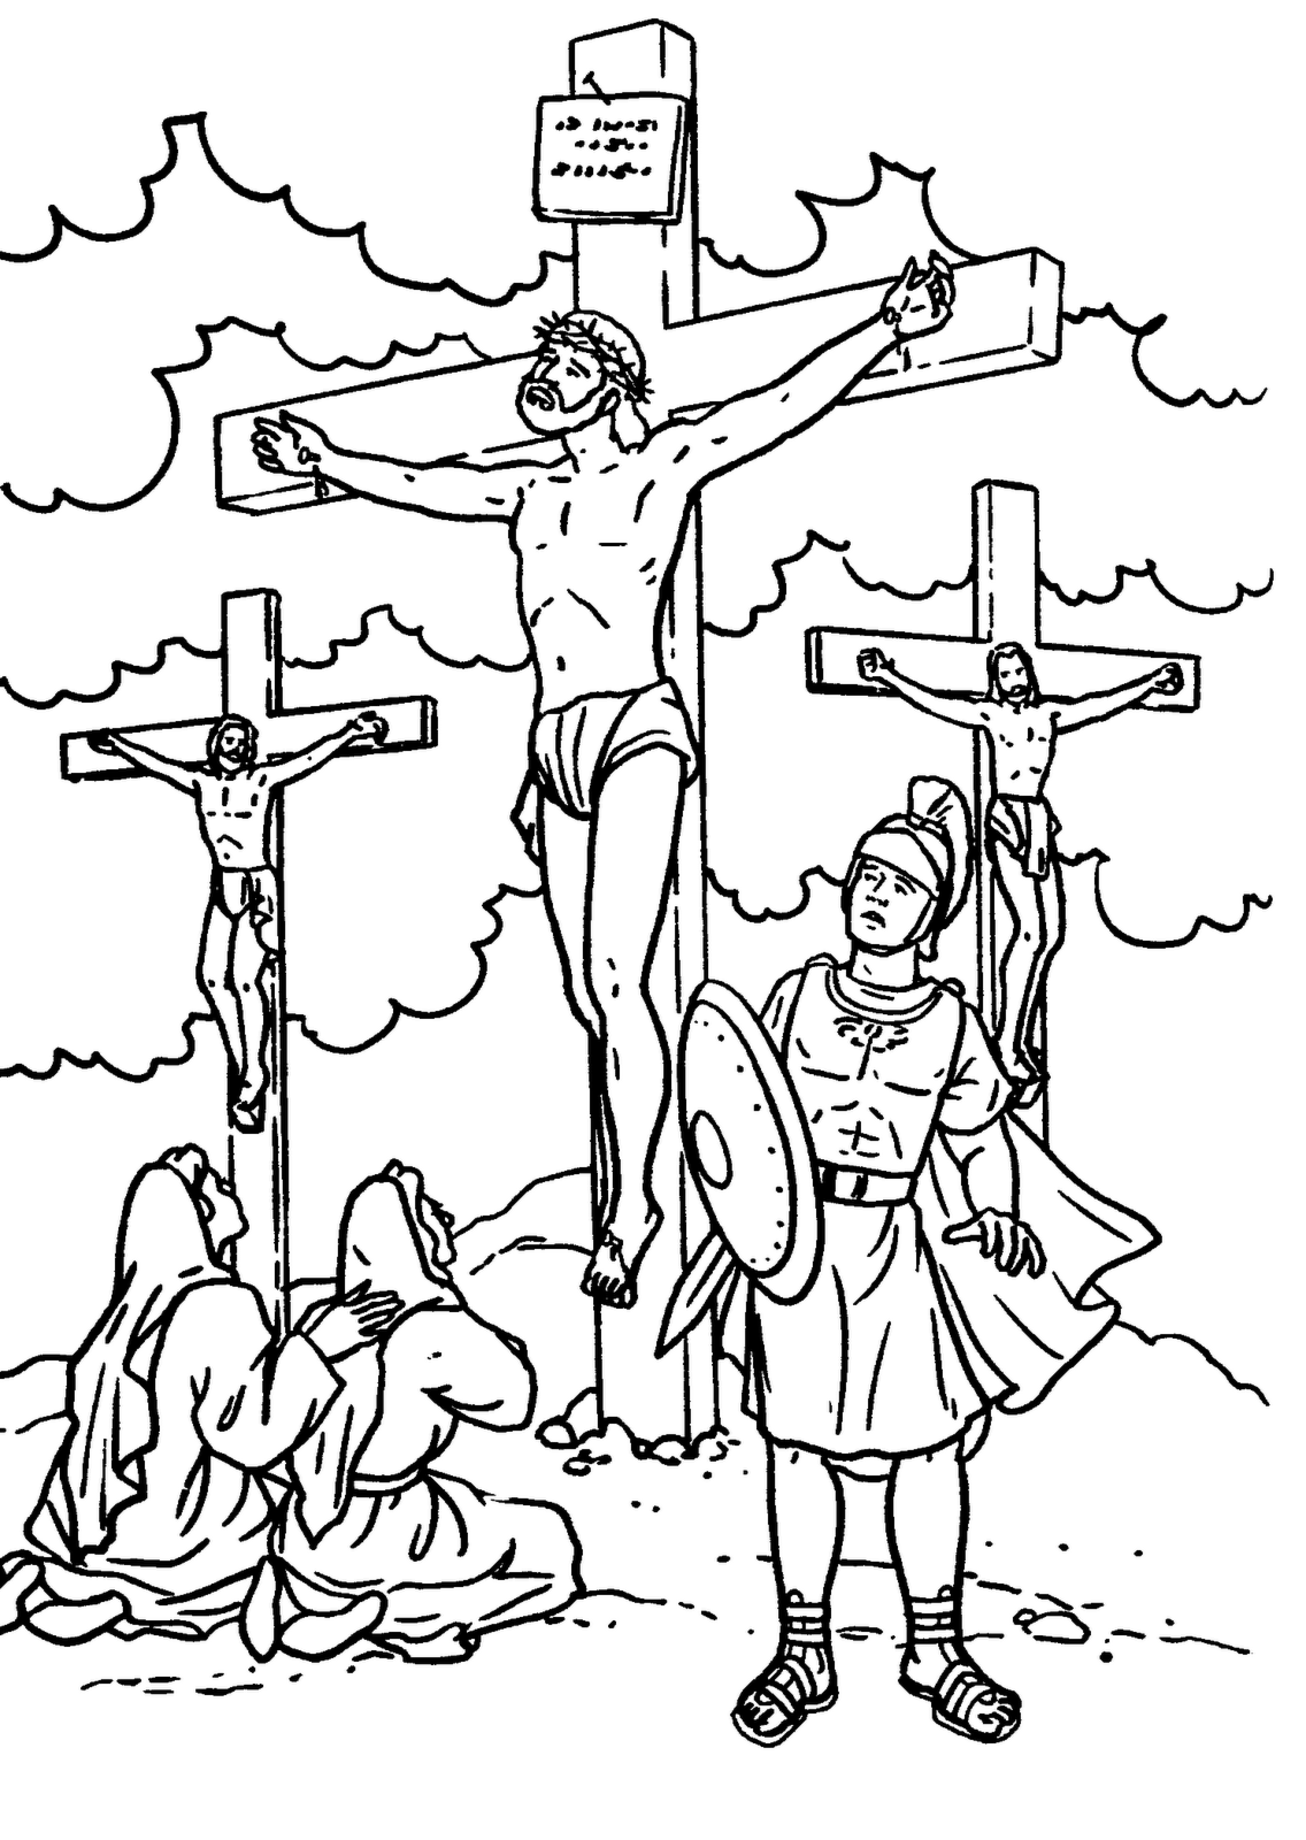 Jesus Knocking At The Door Coloring Pages at GetColorings.com | Free